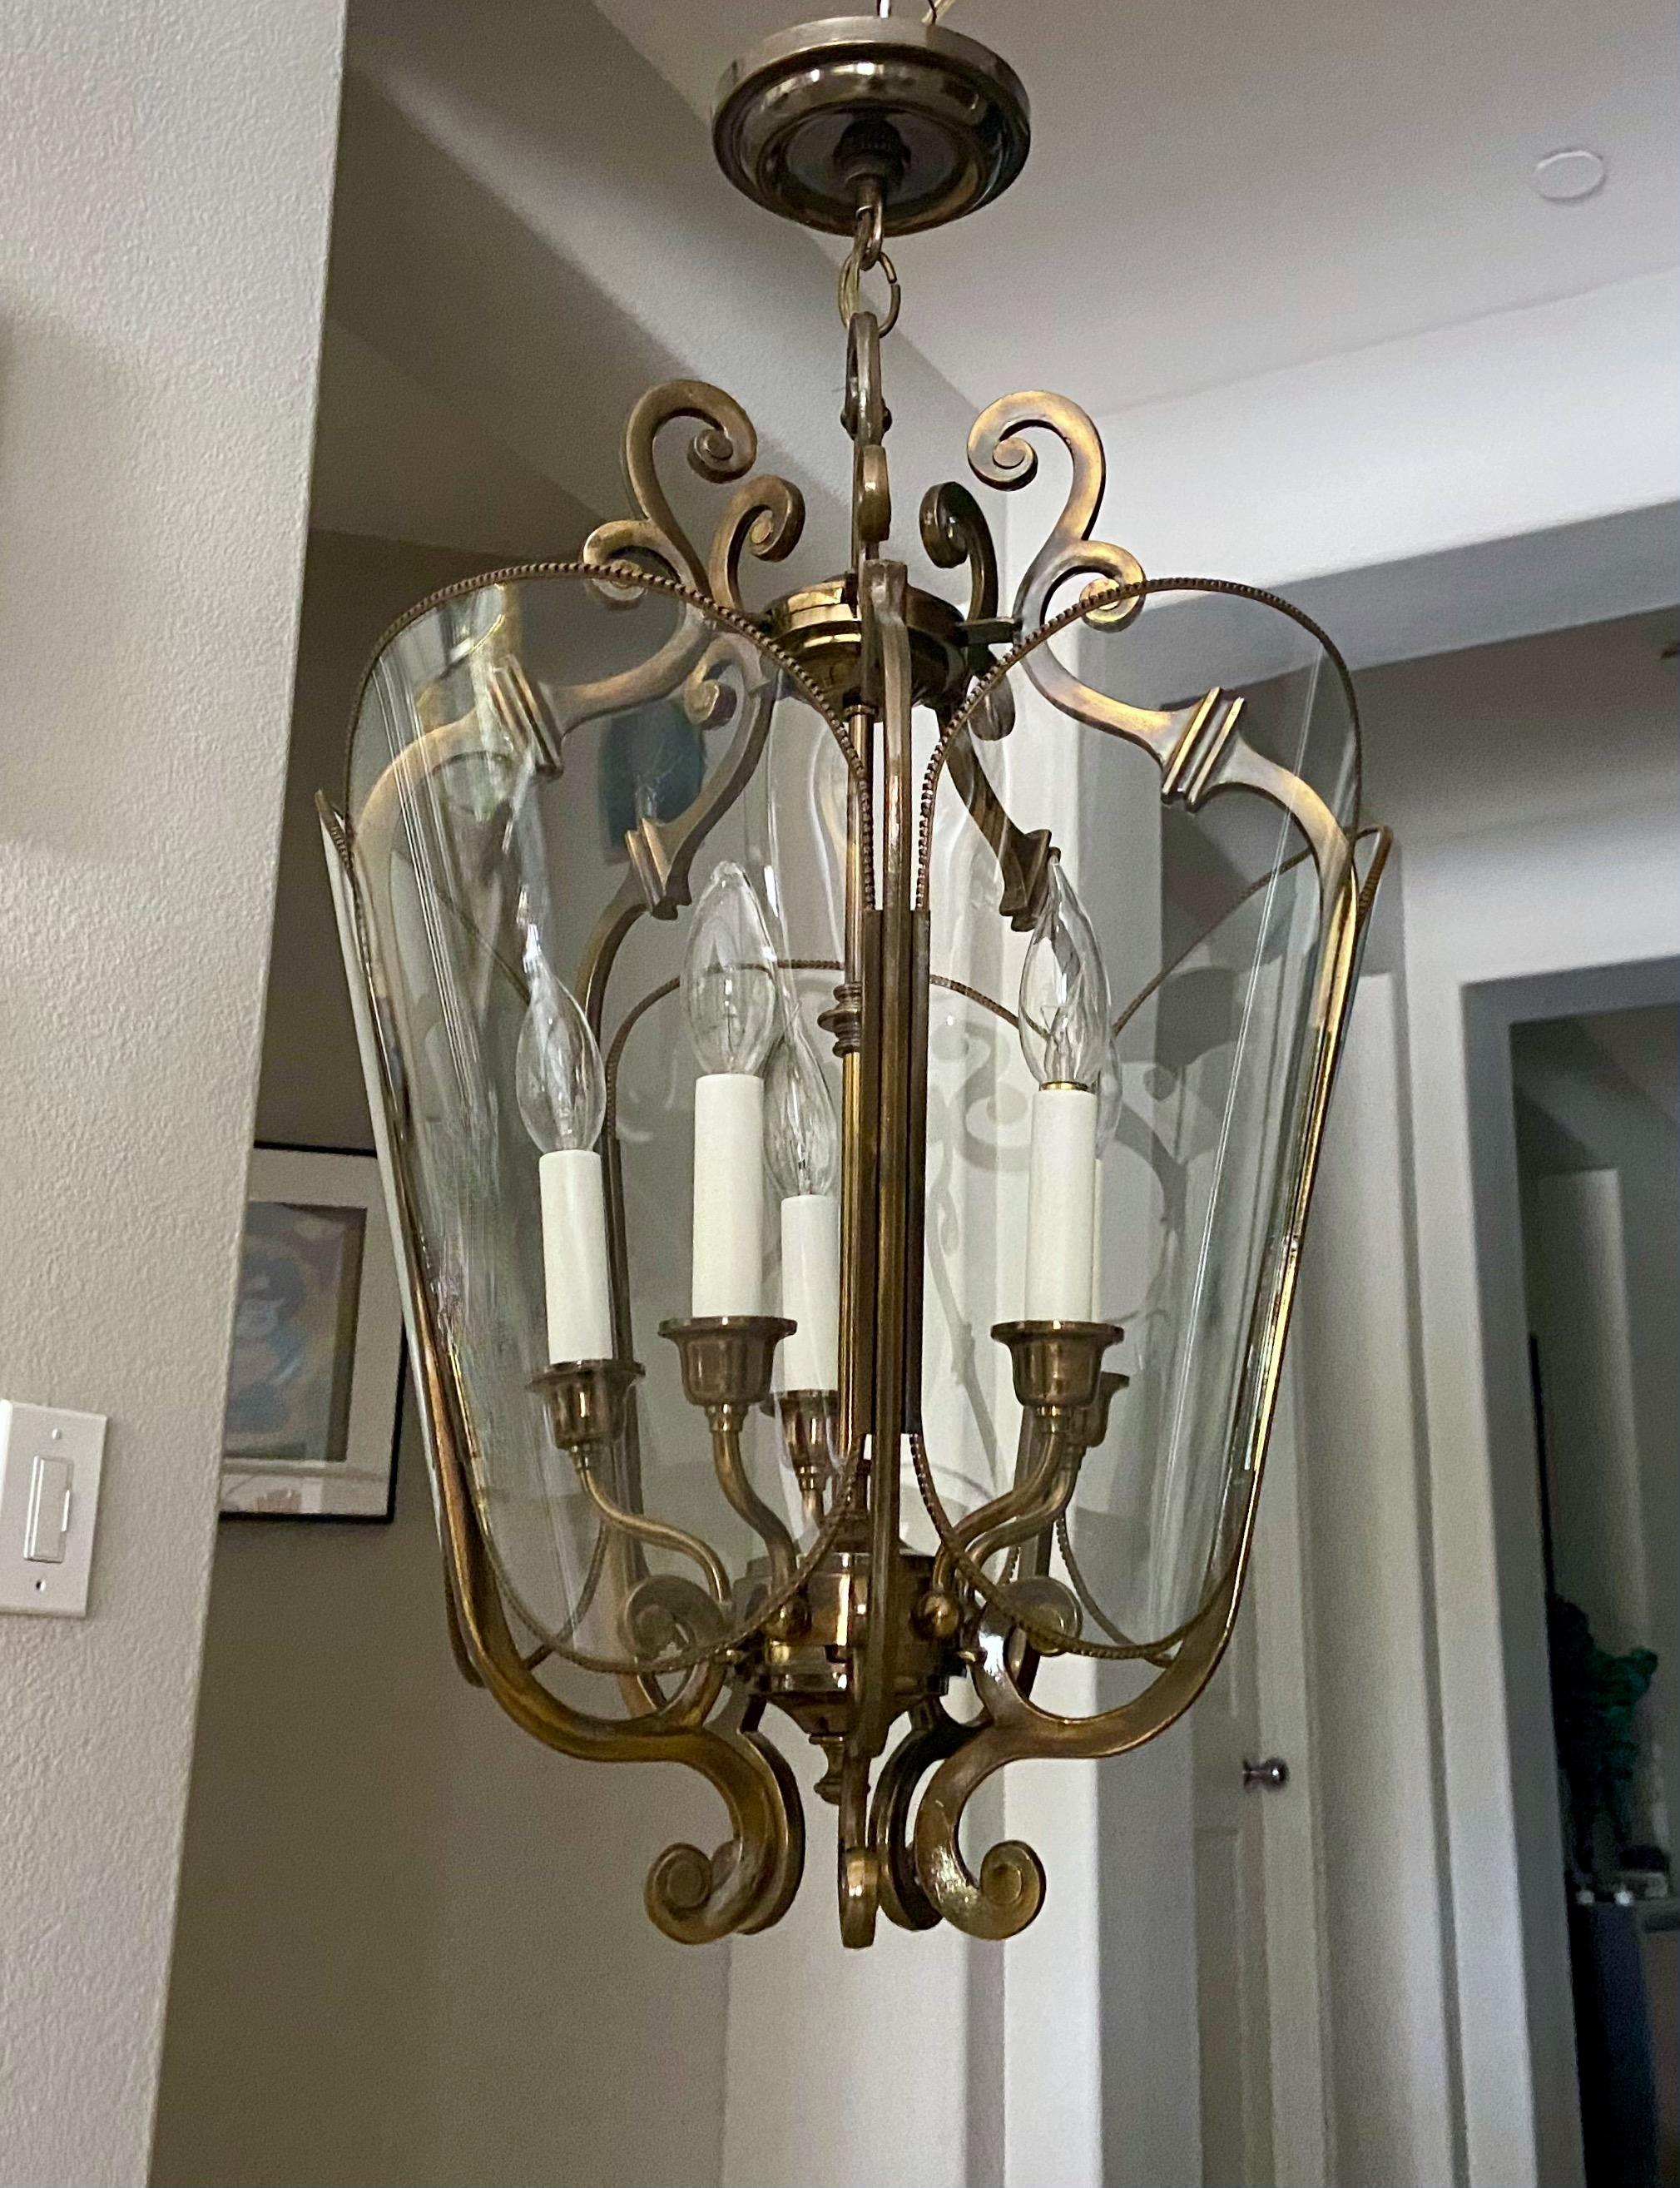 Solid antiqued brass hall lantern or pendant with removable glass panels and five-light arm light cluster, by Feldman Lighting Los Angeles. 
28